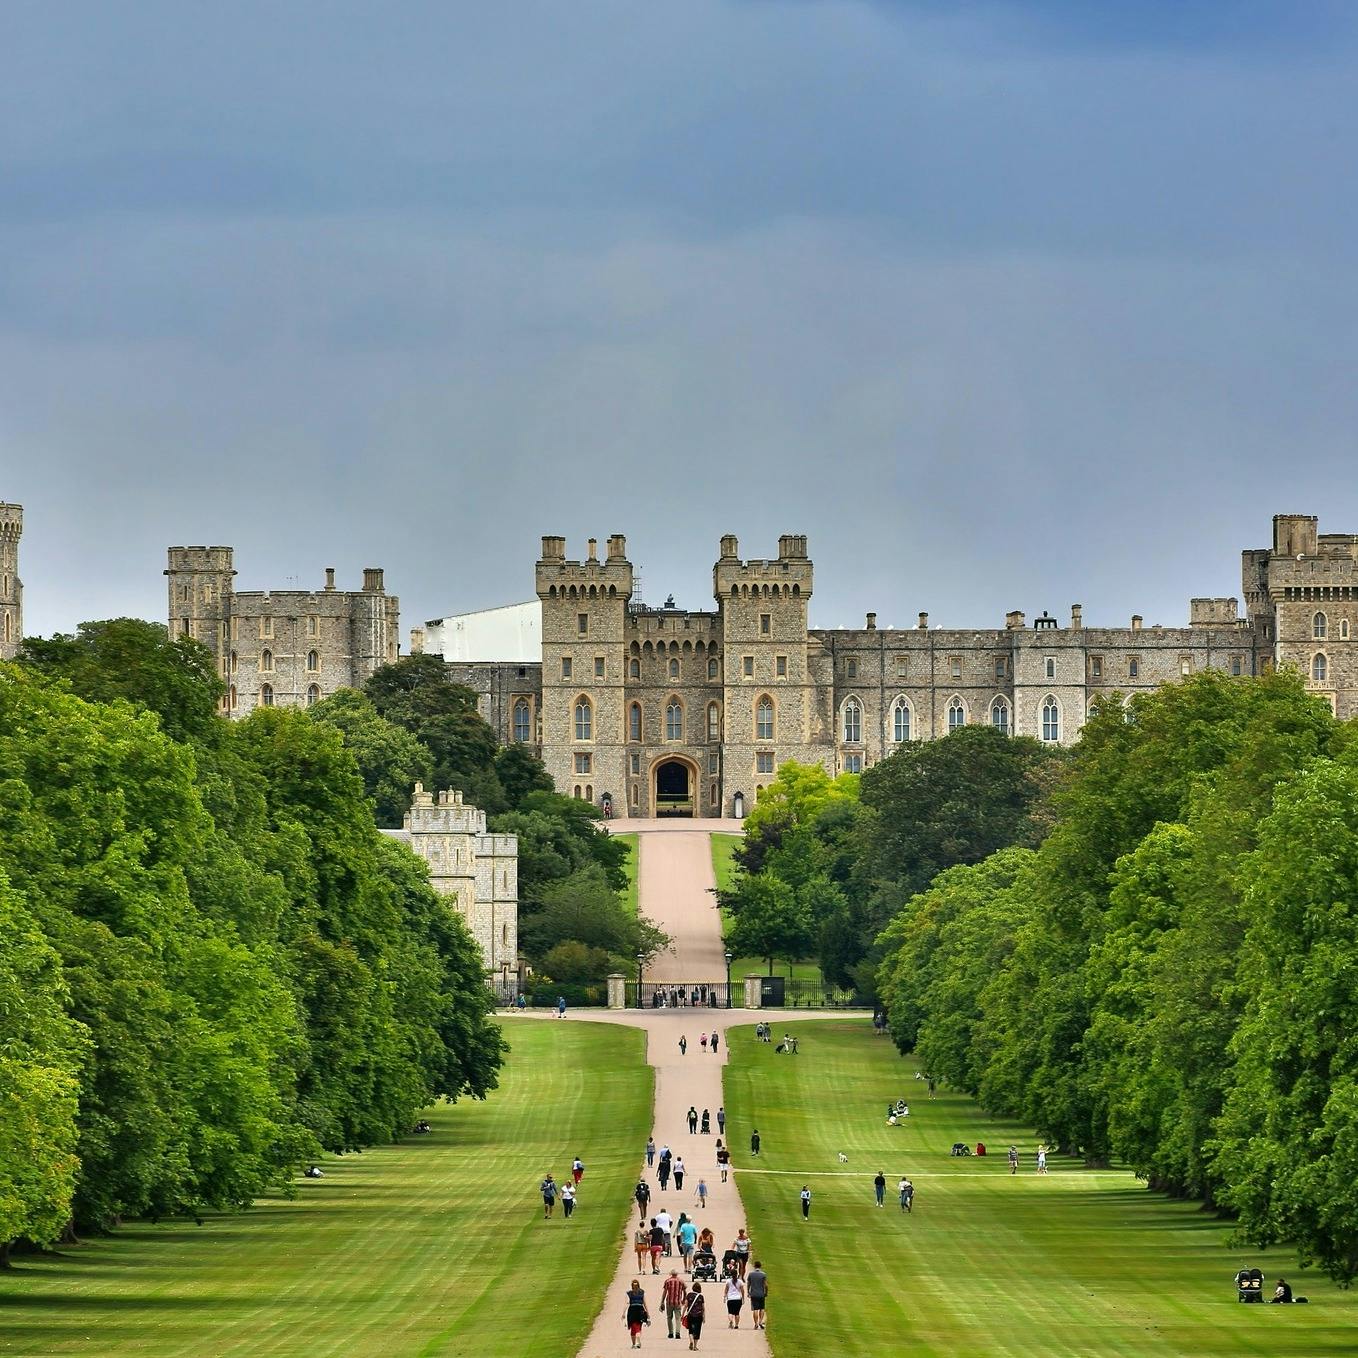 Windsor Castle half-day trip from London with entrance tickets